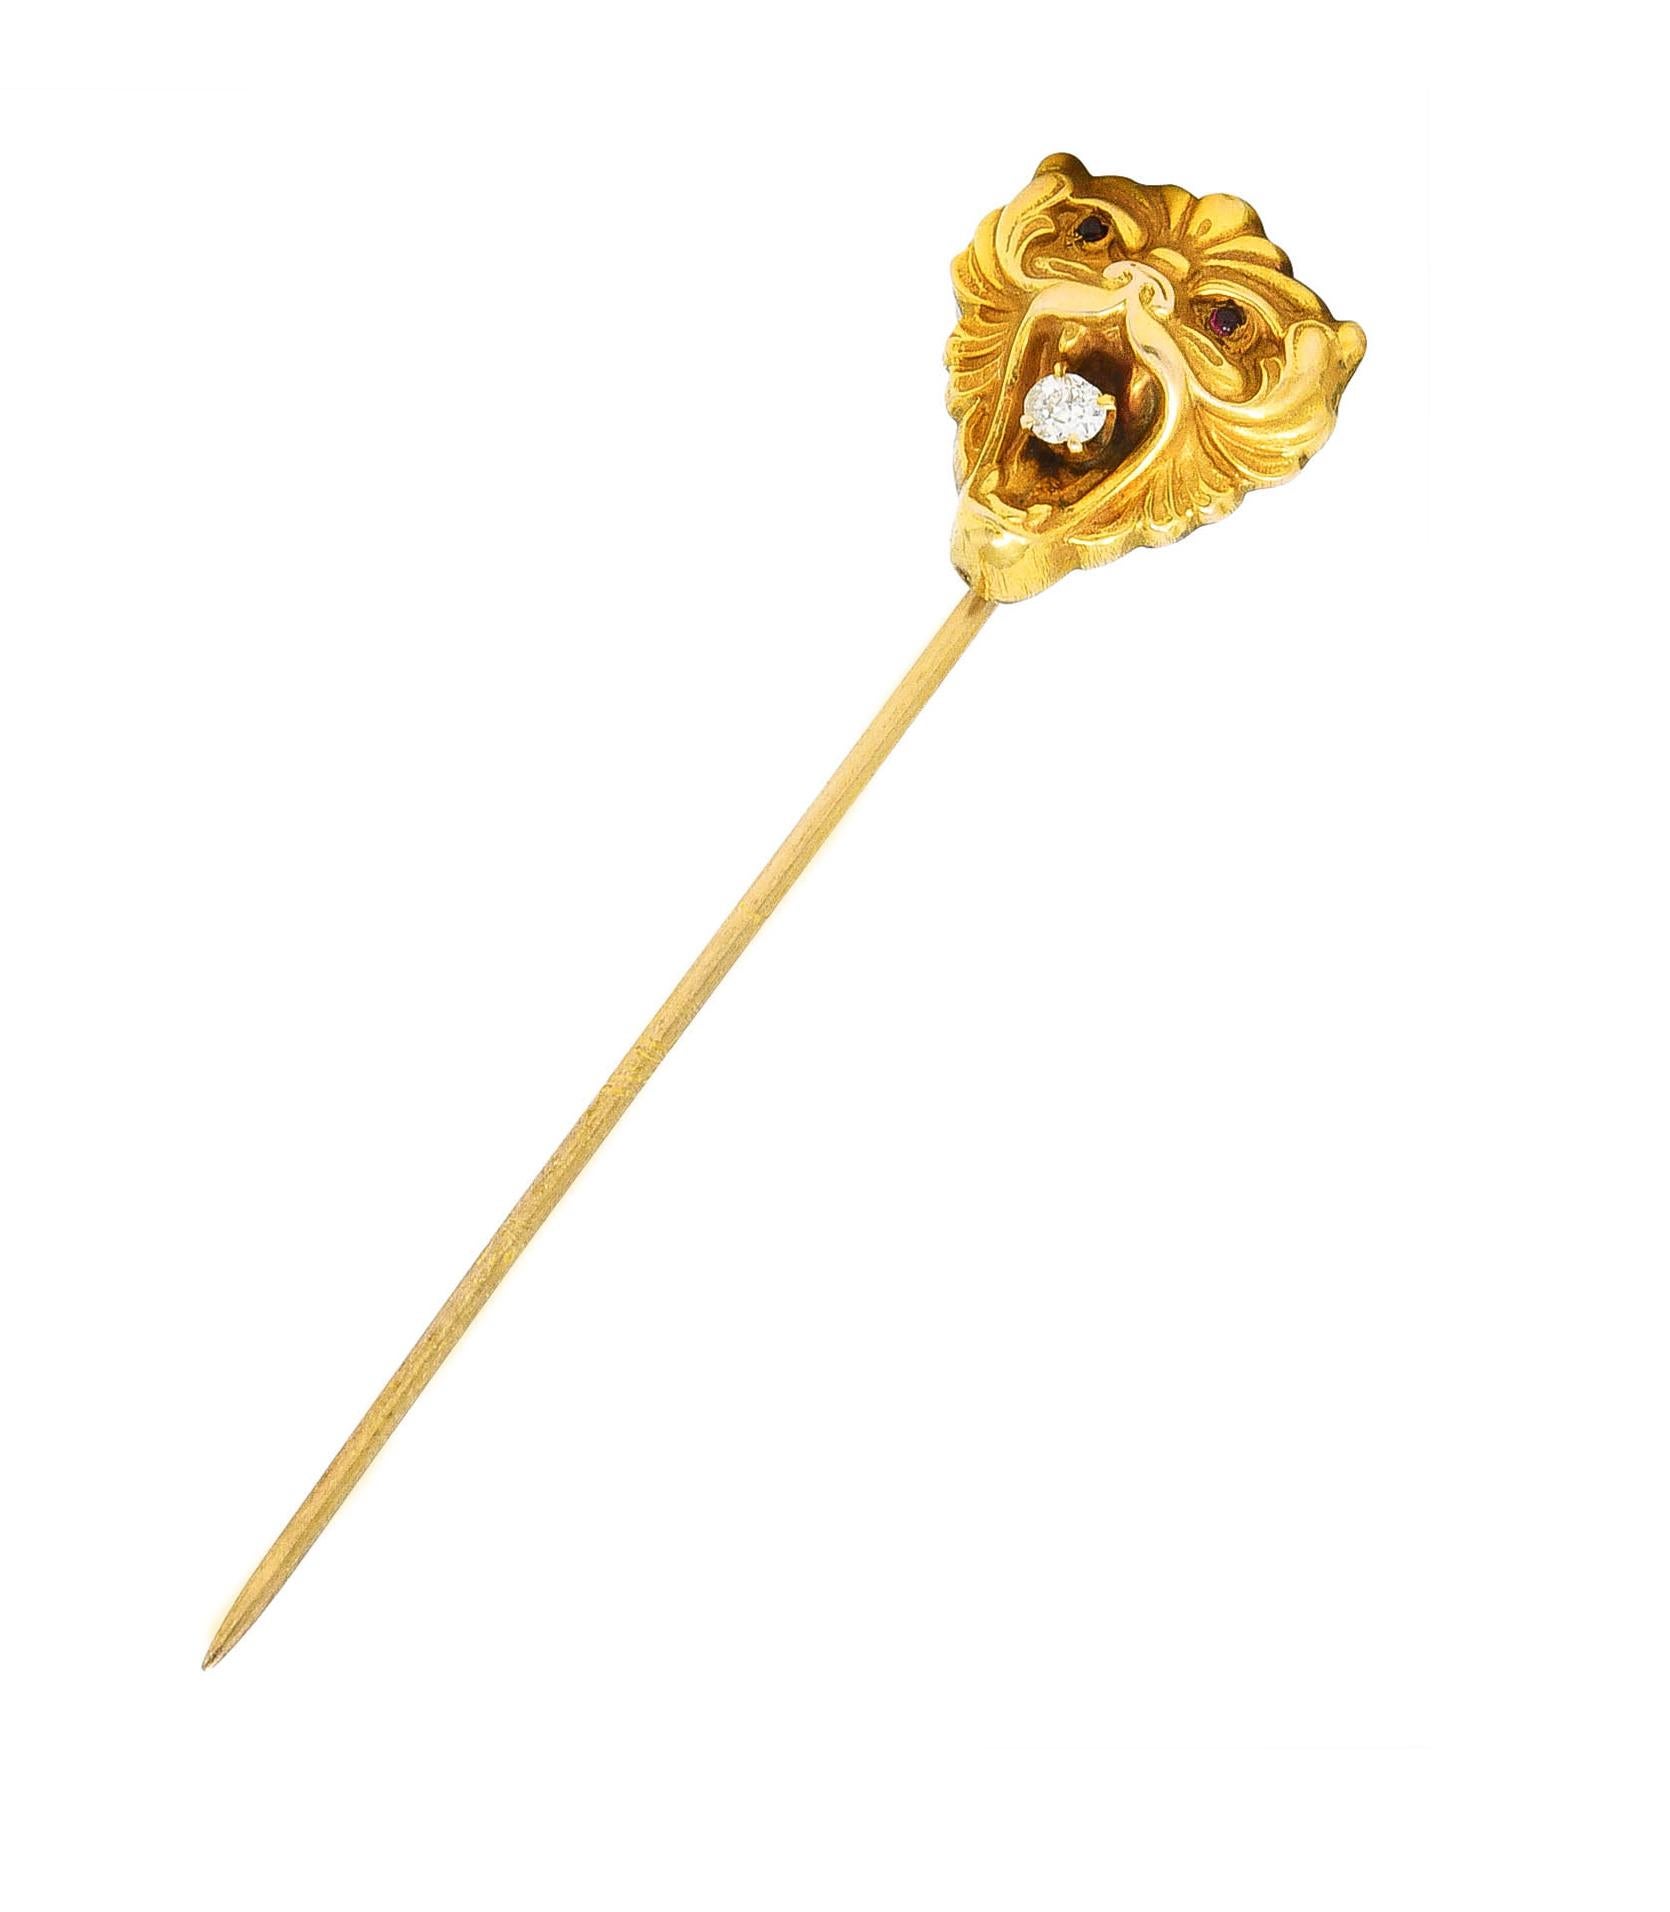 Stickpin is designed as a stylized lion head with swirling grooved fur

Featuring a prong set old mine cut diamond clutched in its teeth

Weighing approximately 0.06 carat - eye clean and bright

Accented by red cabochon eyes

Tested as 14 karat